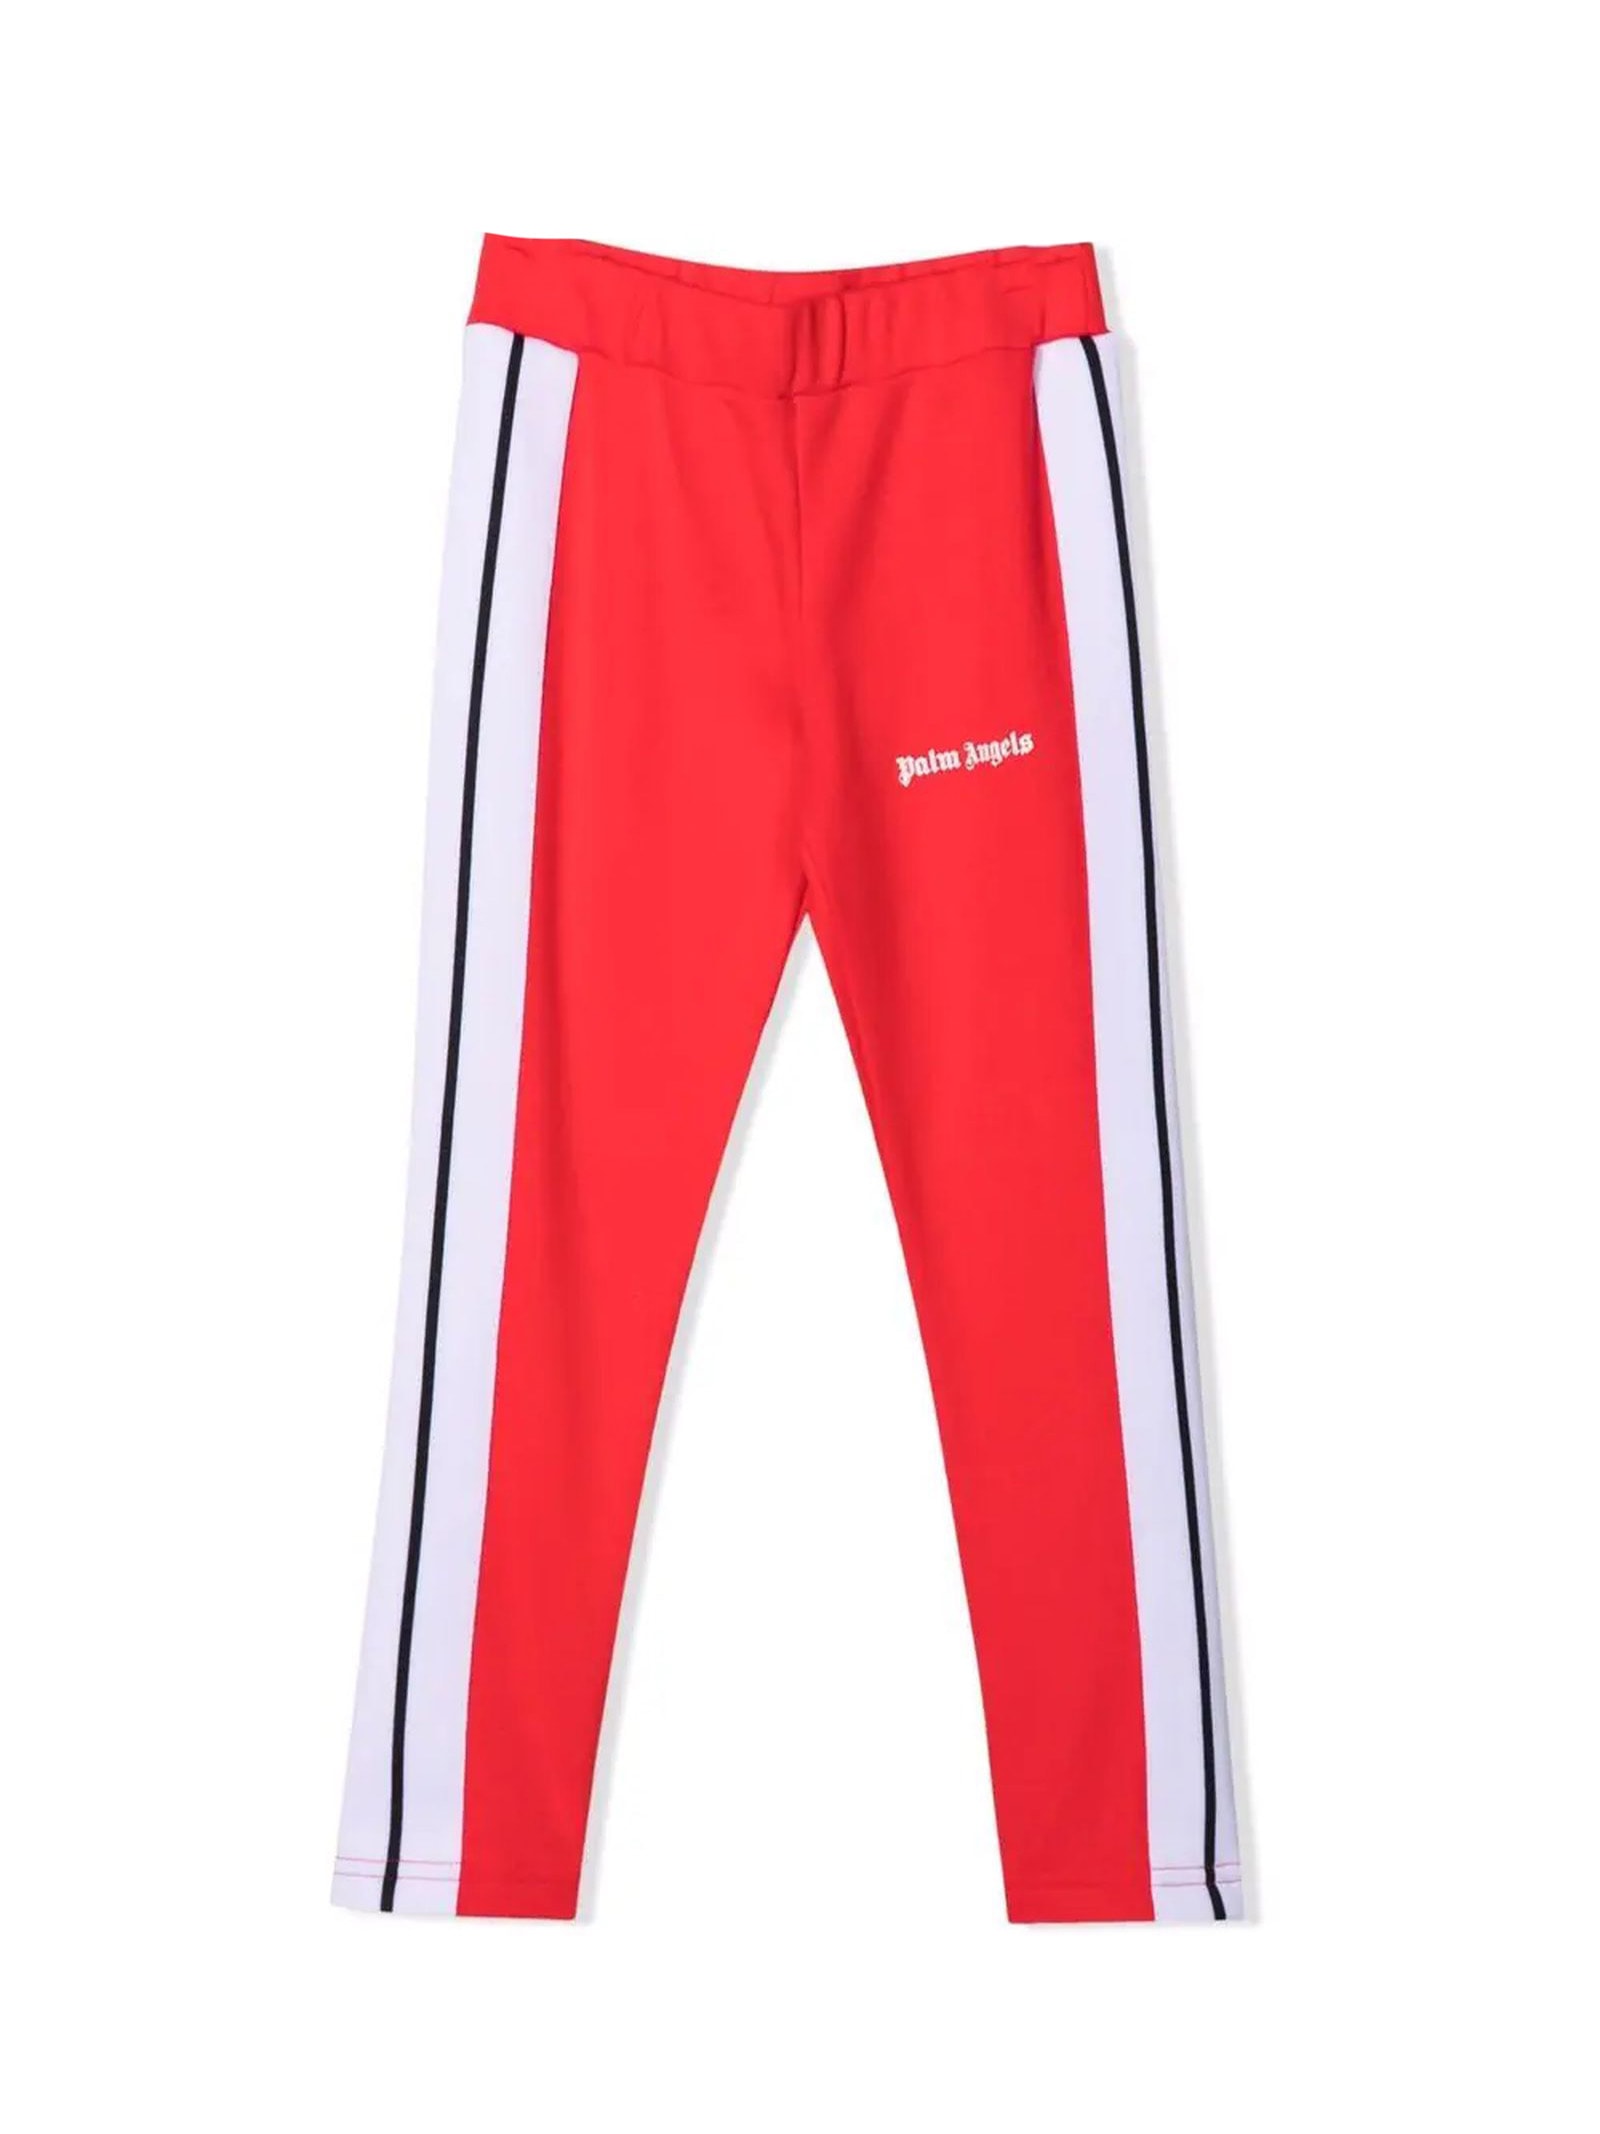 Palm Angels Red Cotton Track Pants